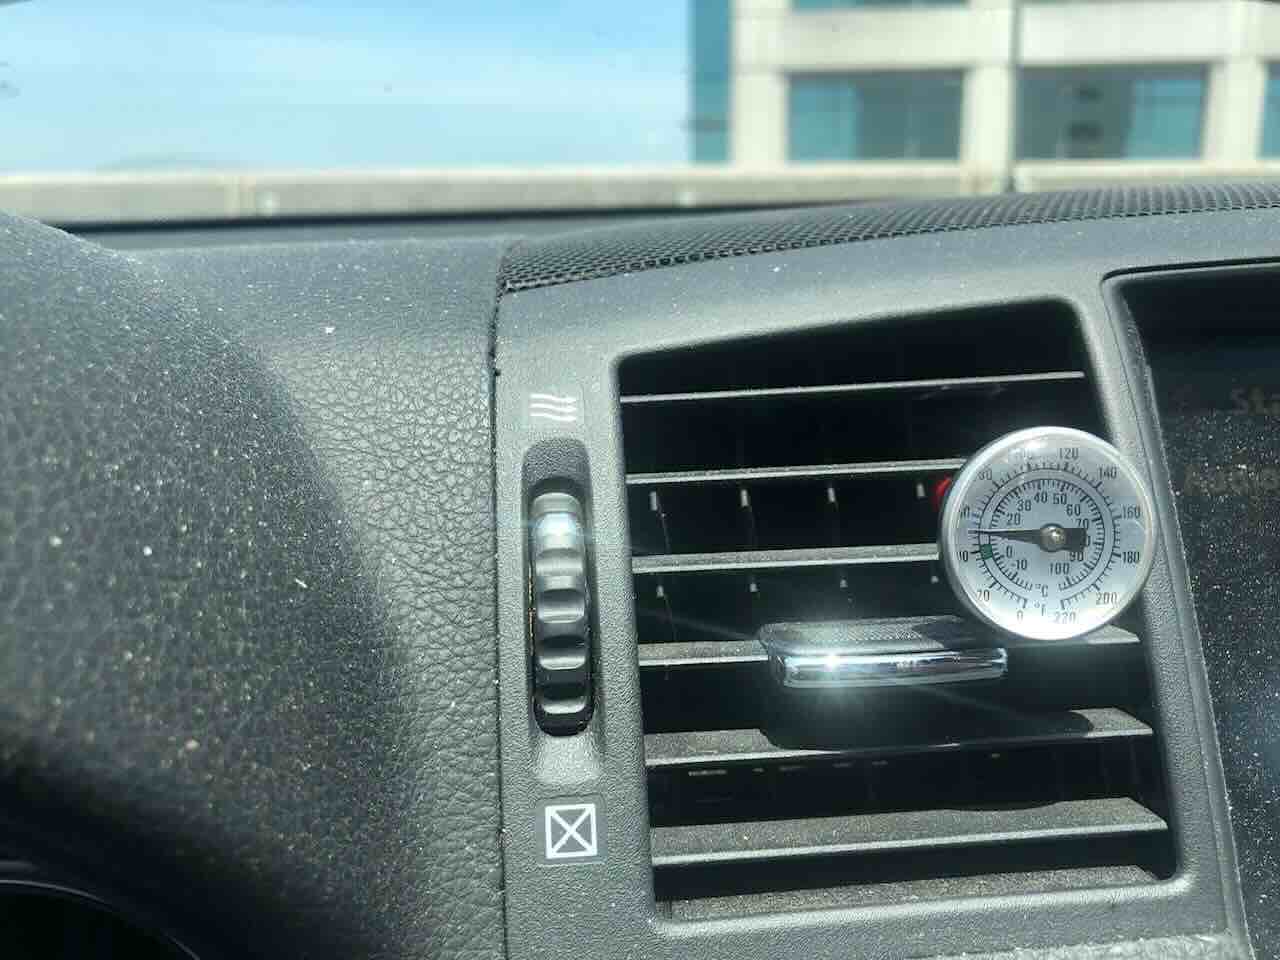 How To Make My Car Air Conditioner Colder